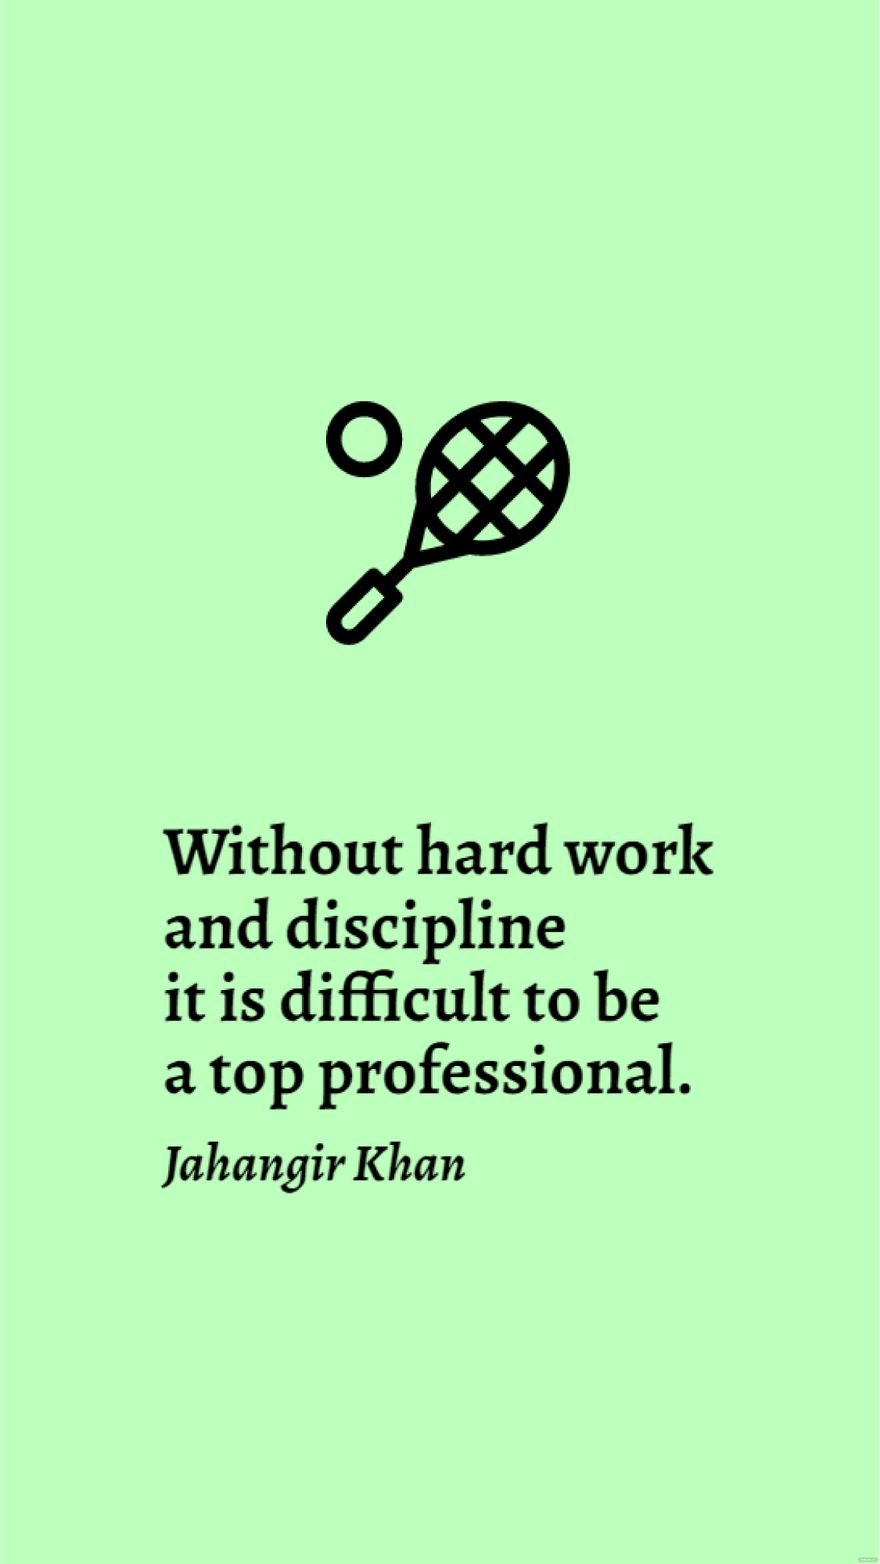 Free Jahangir Khan - Without hard work and discipline it is difficult to be a top professional. in JPG